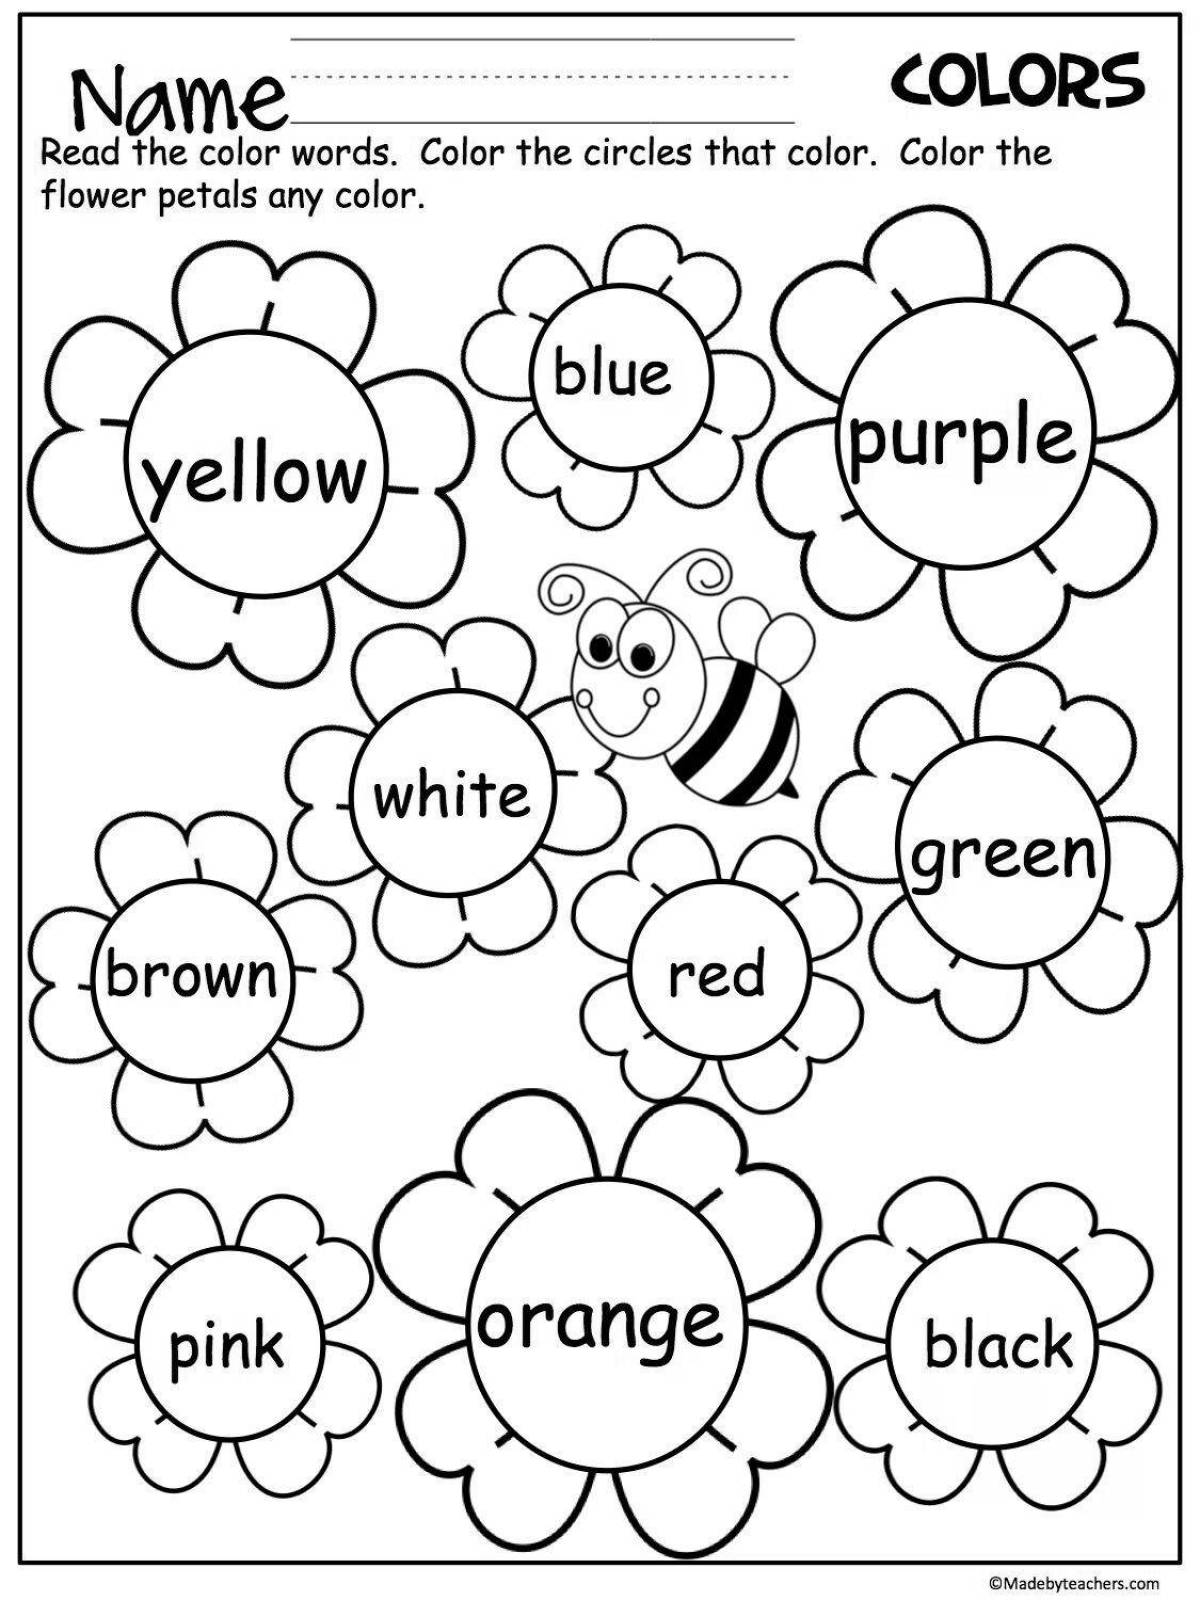 Coloring pages in English for children